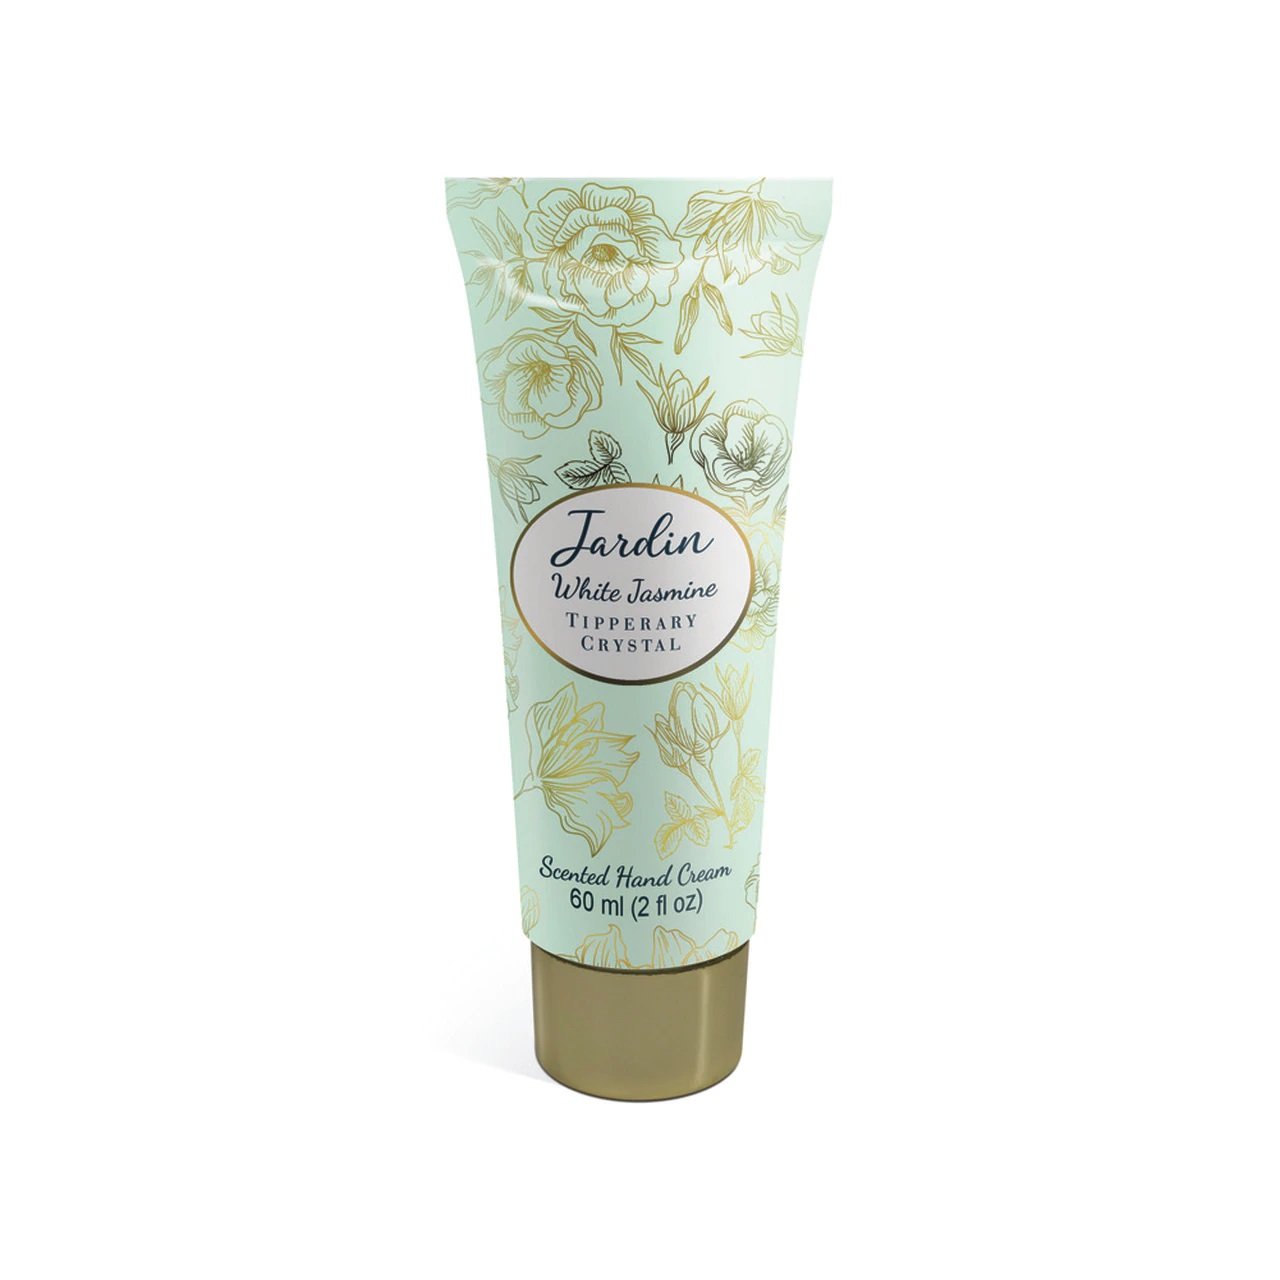 Gorgeous Jardin handcreams from Tipperary Crystal are the ultimate pampering treats and would make a lovely gift for someone special. They come presented in a beautiful keepsake tin. Each moisturising handcream is 60ml.